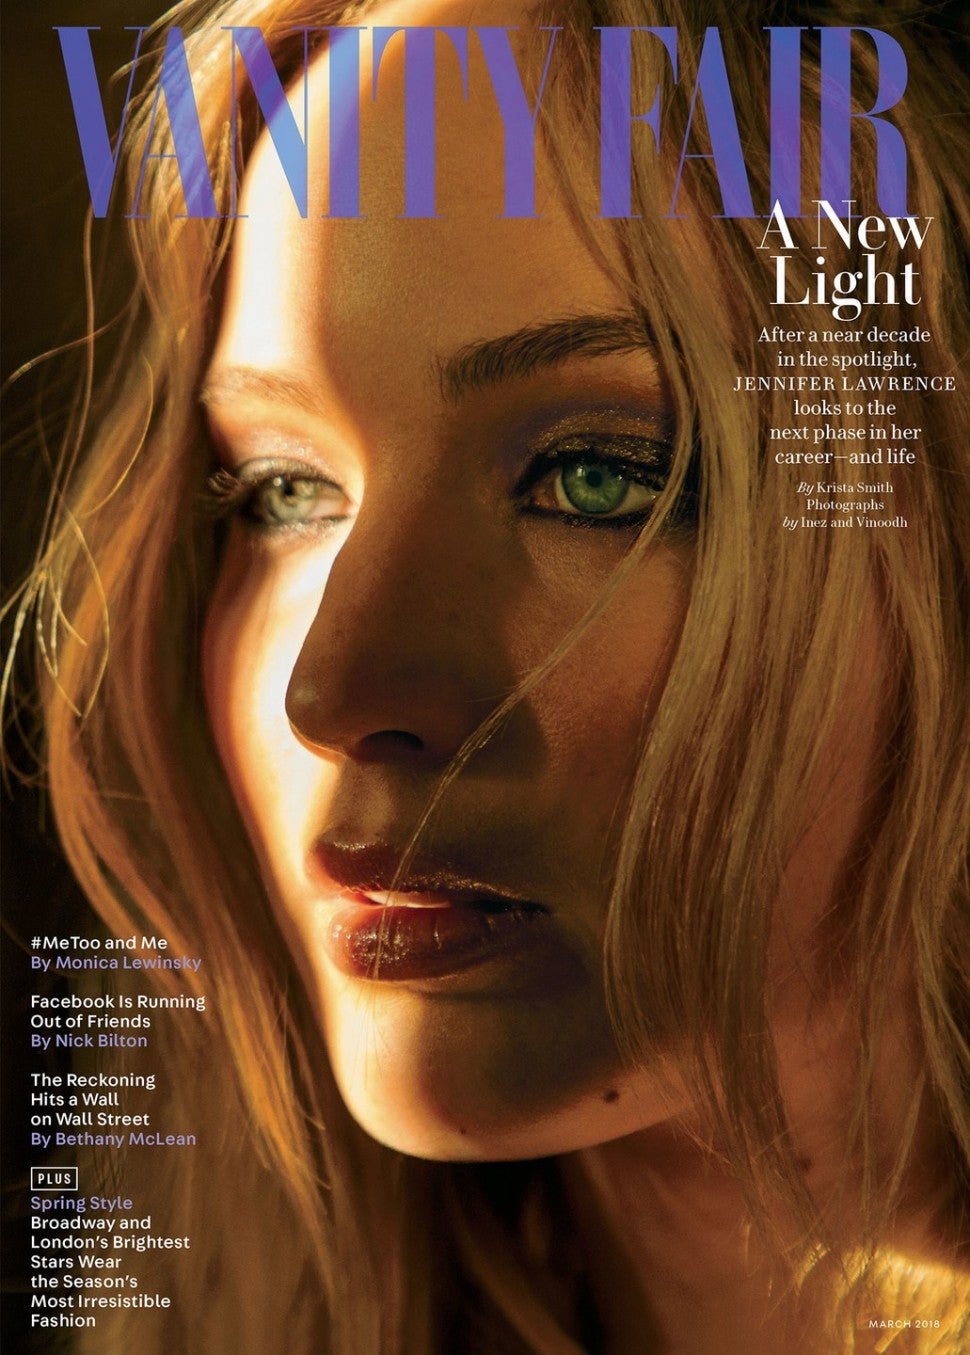 Jennifer Lawrence covers March issue of Vanity Fair